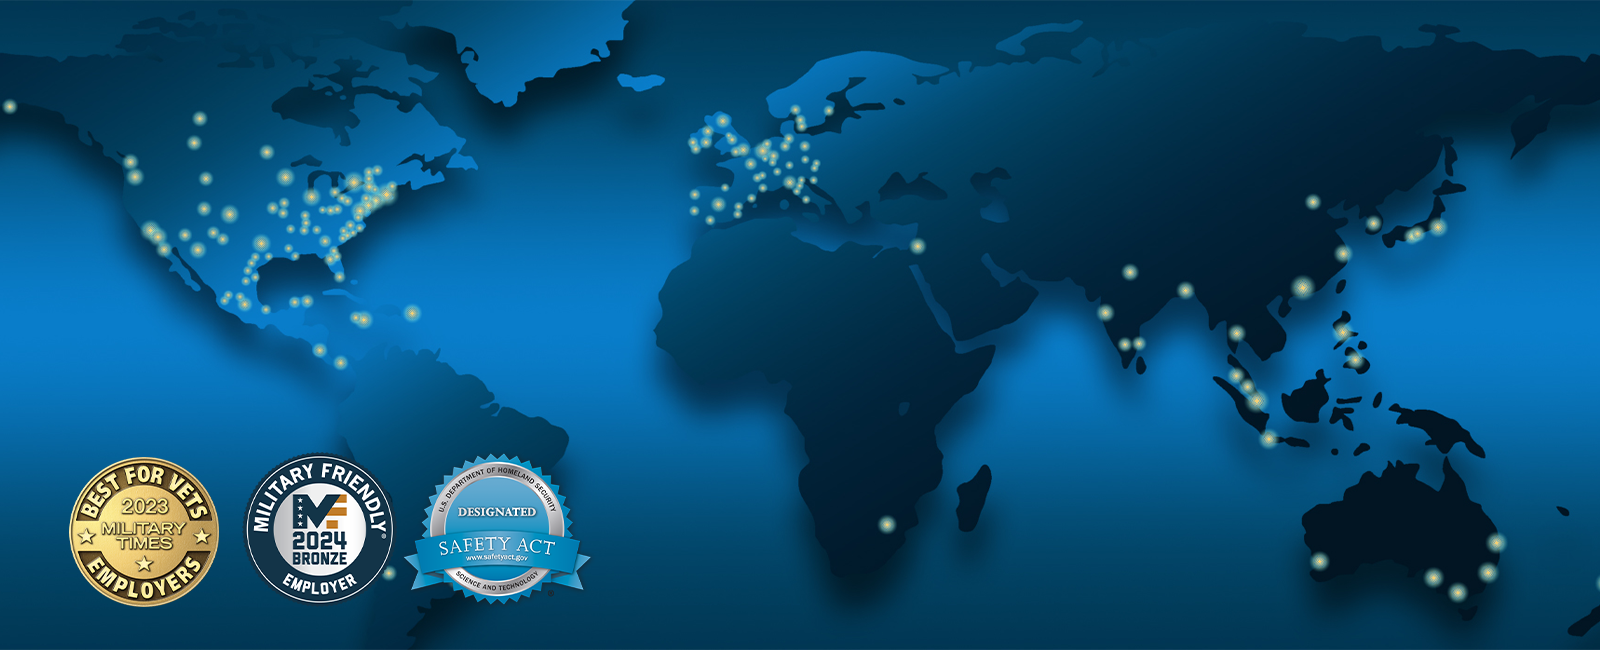 MSA delivers threat protection solutions throughout the globe